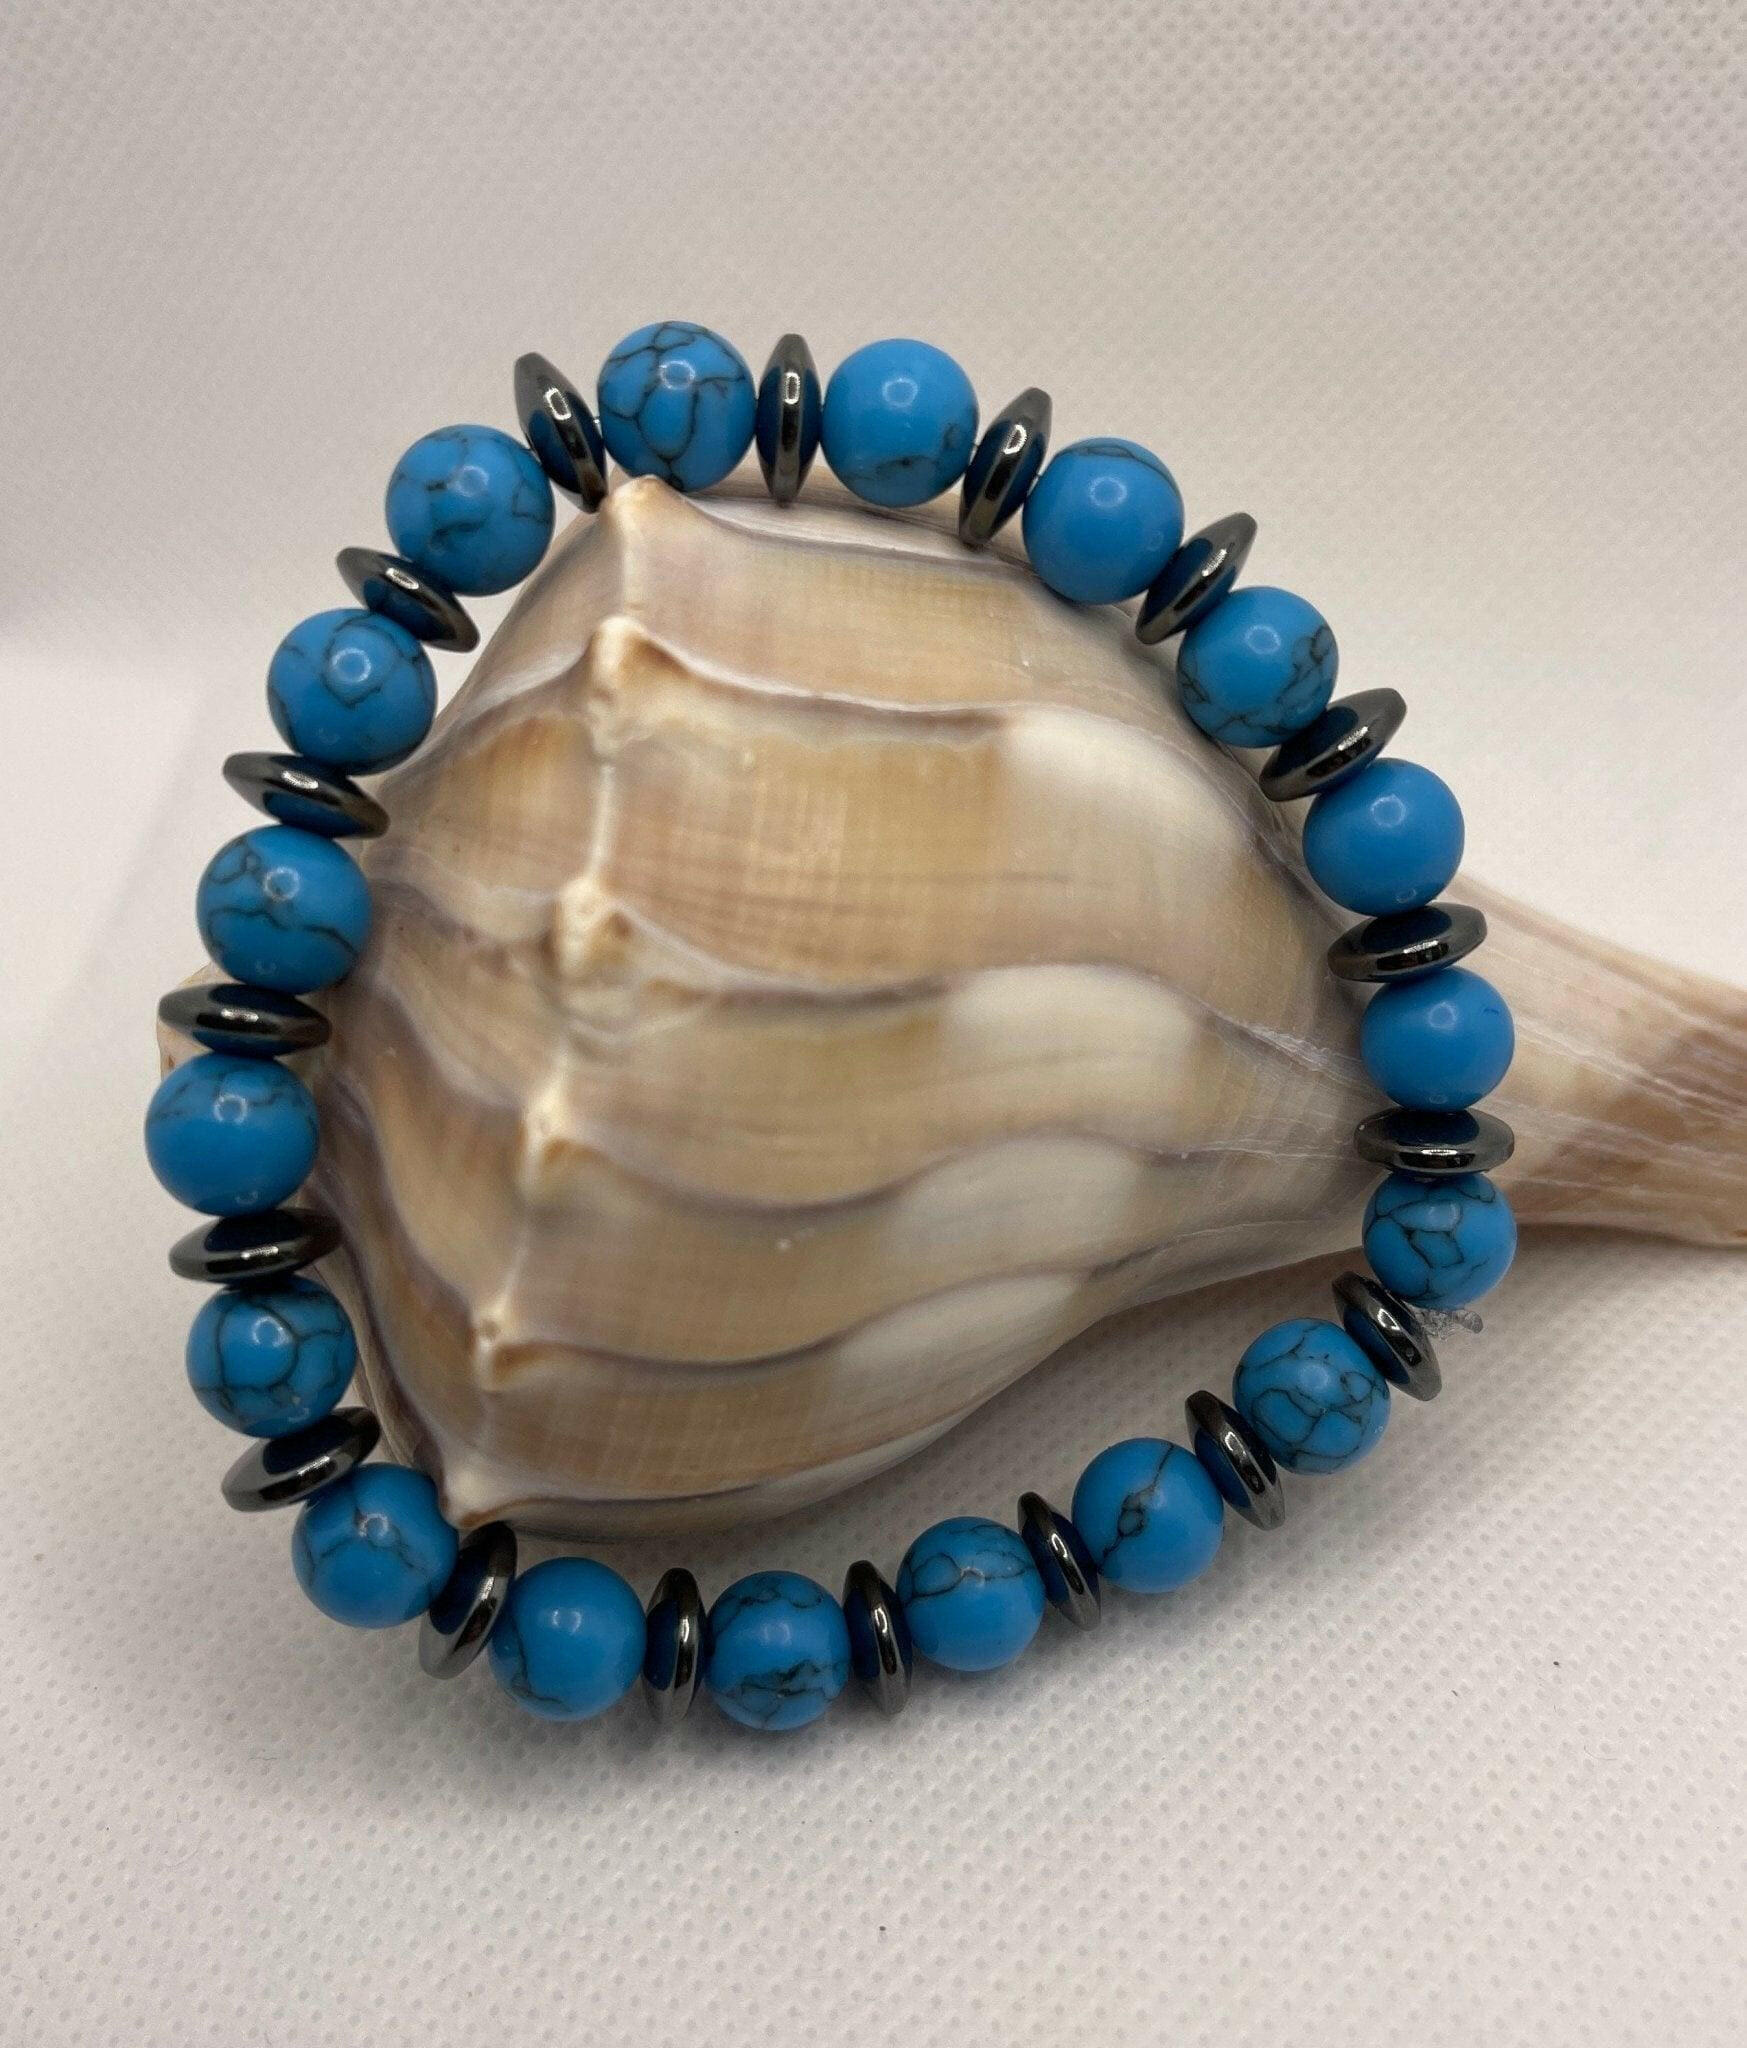 Bec Sue Jewelry Shop bracelet One-of-a-Kind Blue Turquoise 8mm Bracelet with Hematite Rondelle Accents Tags